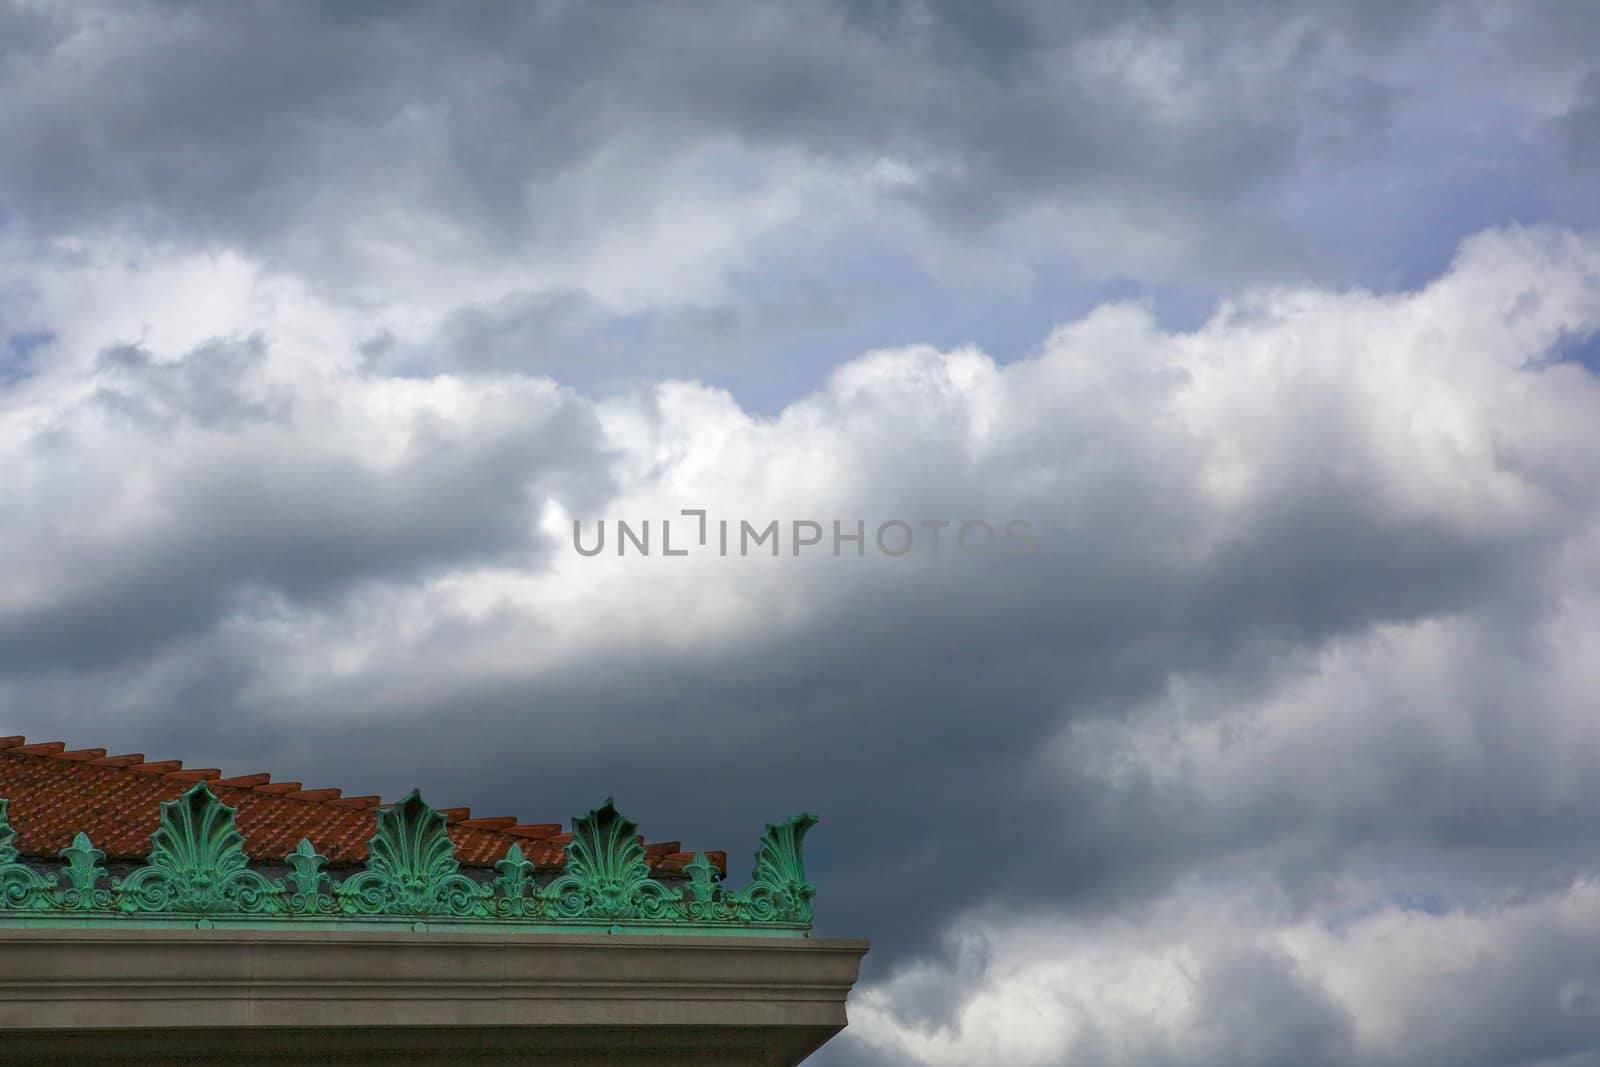 Darkening clouds over a read tile roof with green ornate decorations